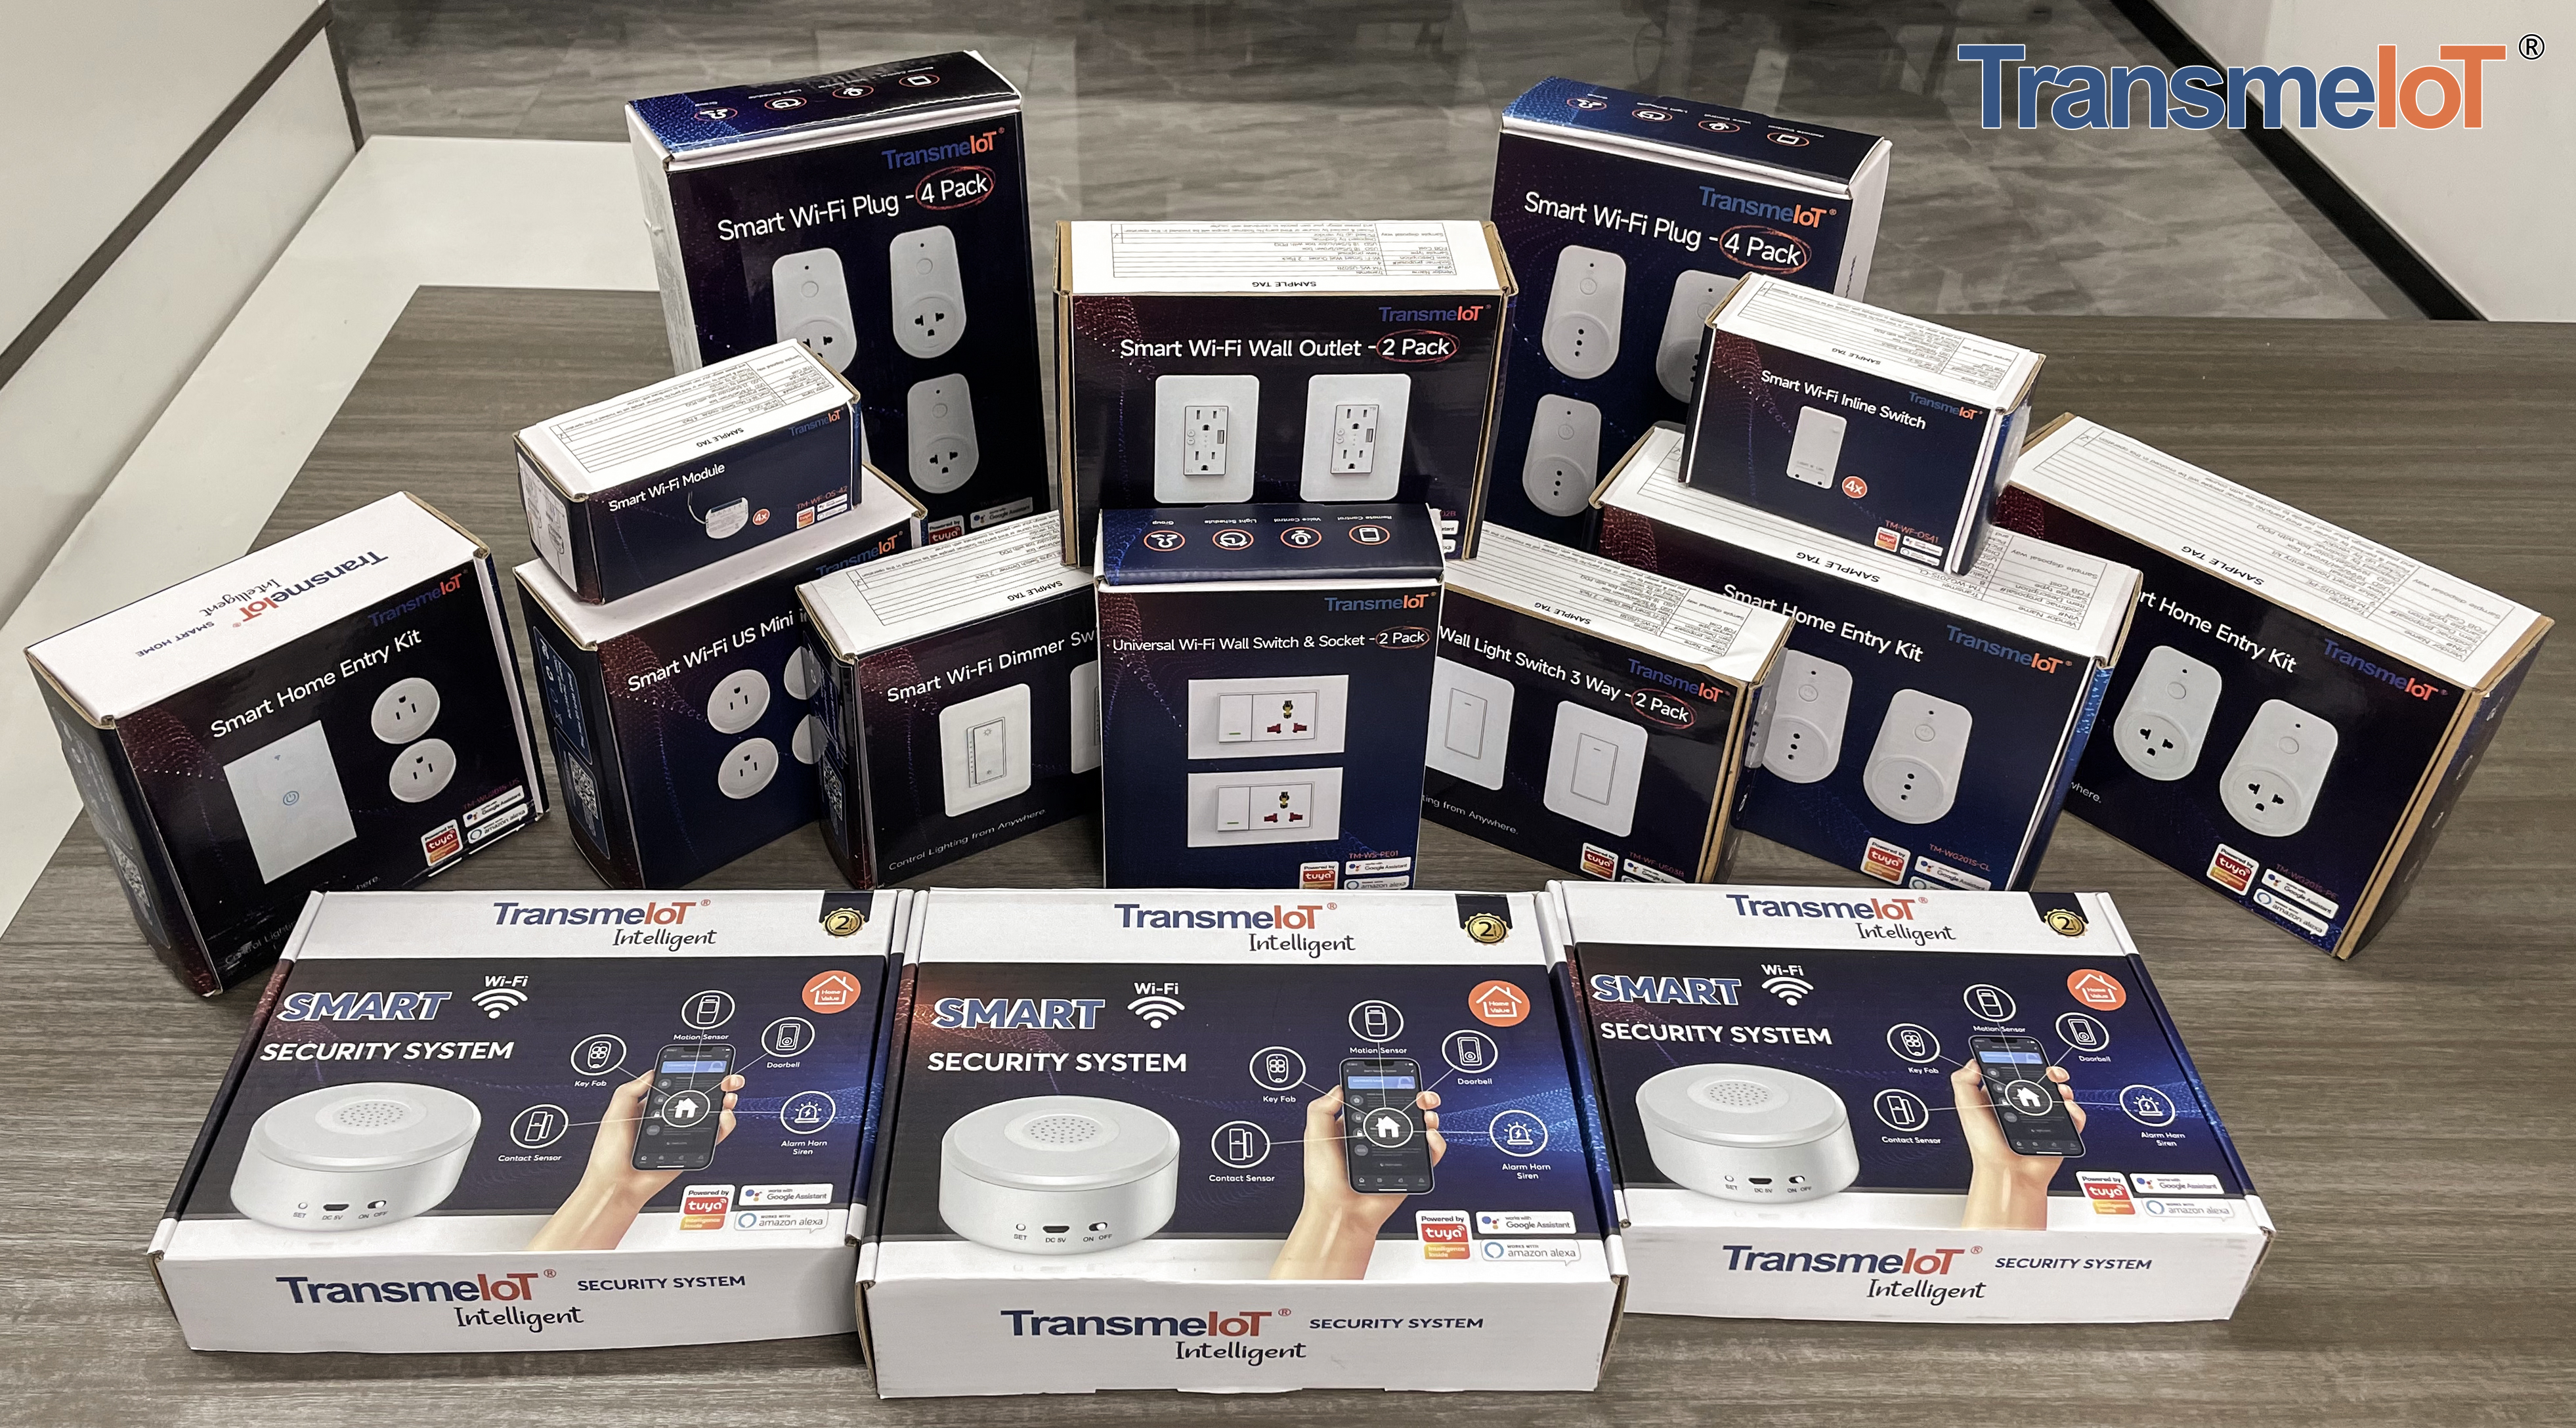 TransmeIoT family is comming, they are entry level kits for intelligent home electronics.